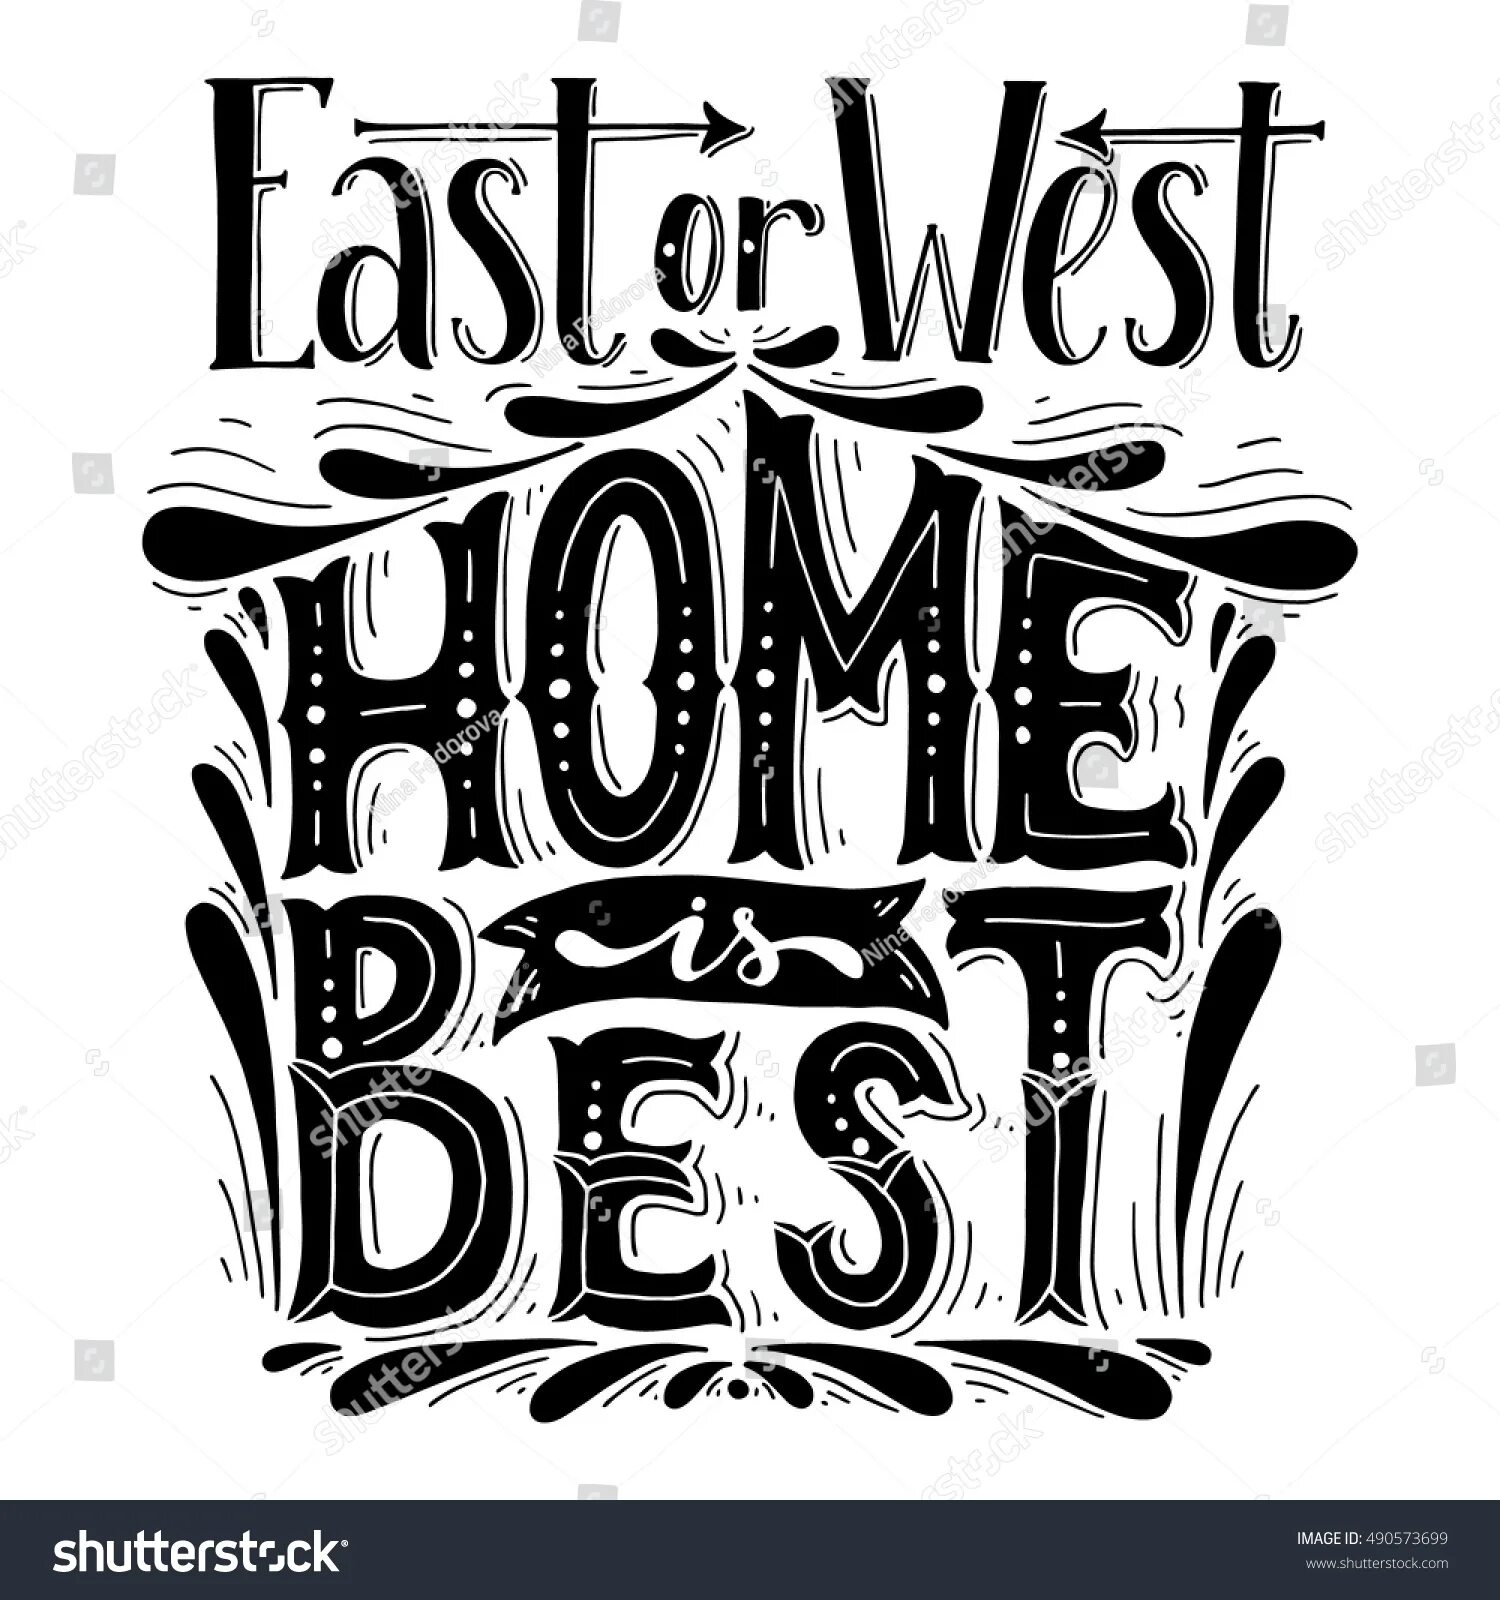 Are we good meaning. East or West Home is best. East or West Home is best иллюстрация. East or West Home is best русский эквивалент. Ист о Вест хоум из Бест.